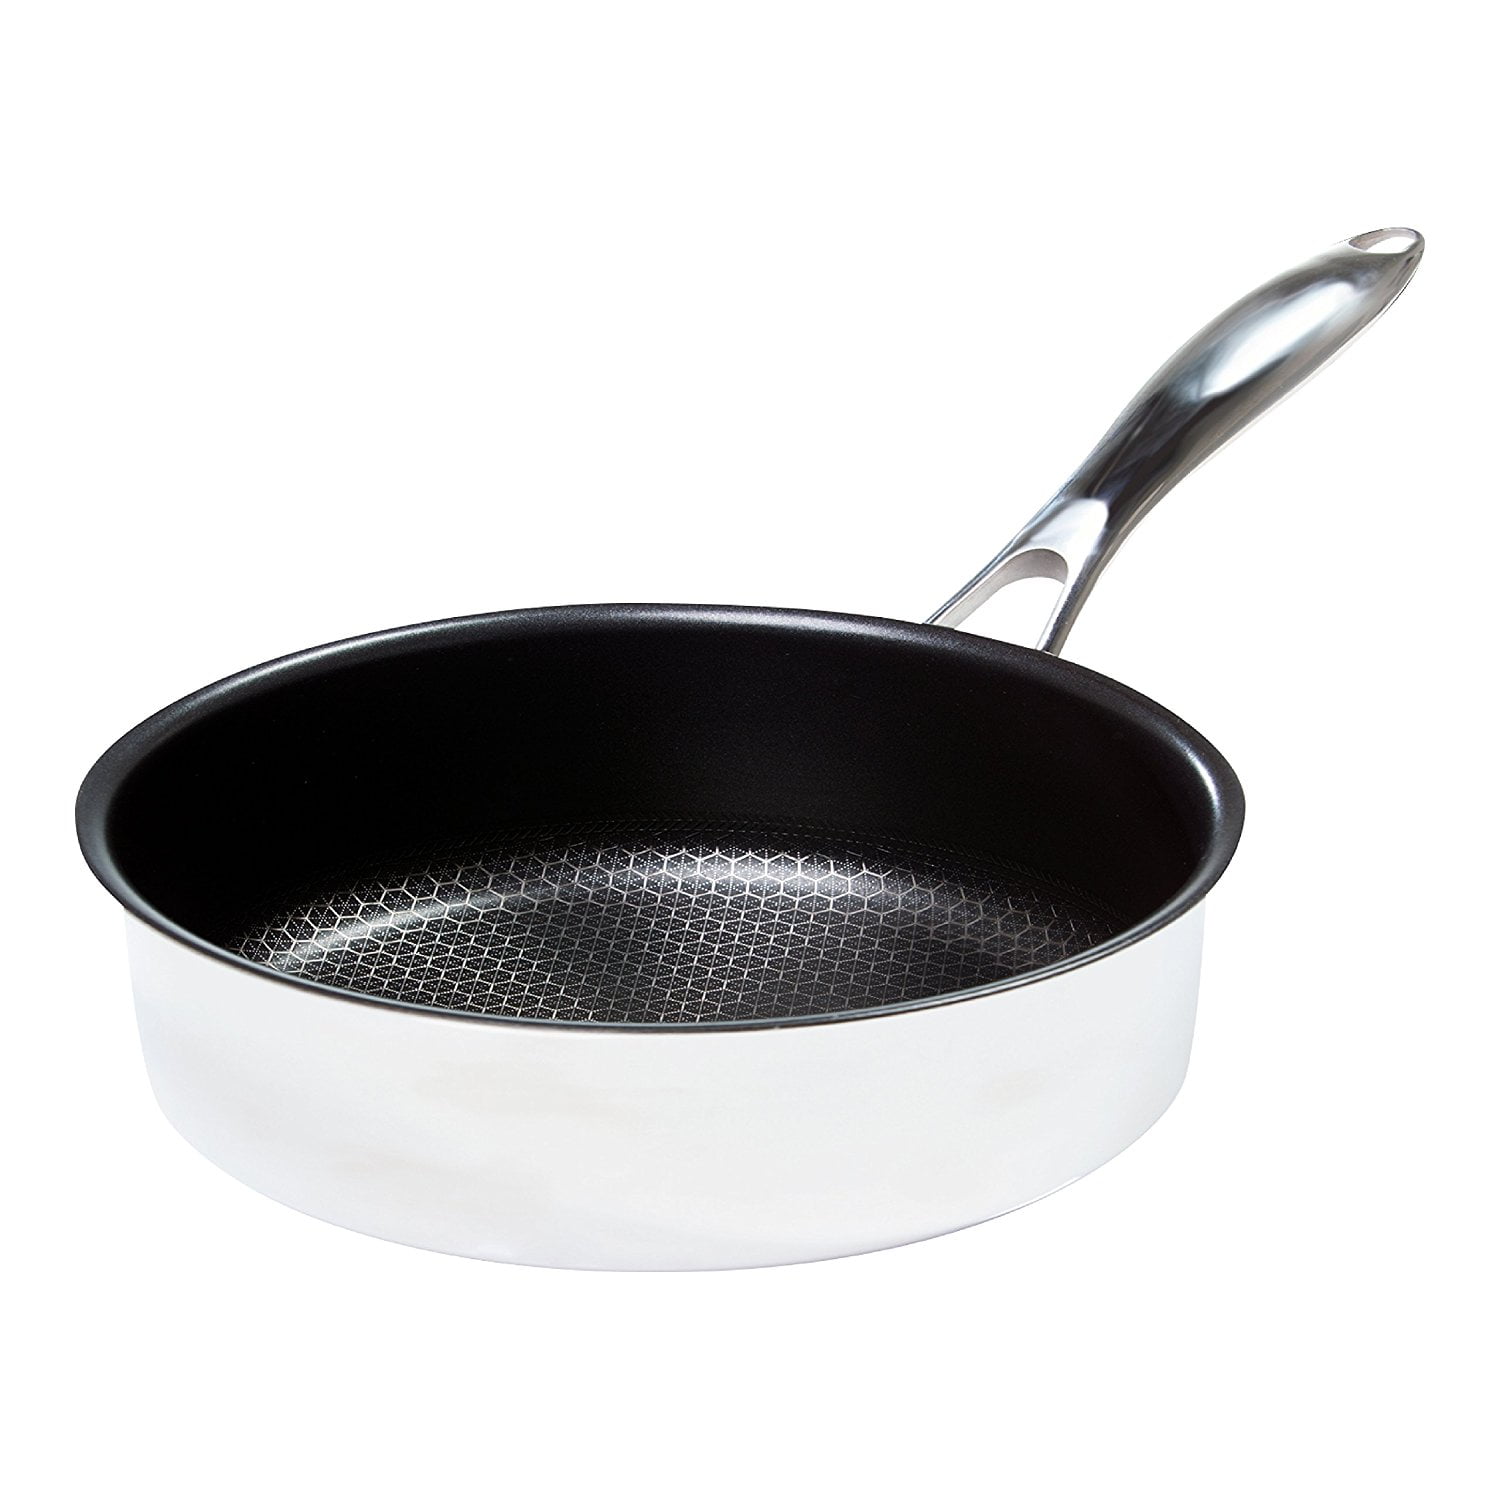 Black Cube 4.5 qt. Hybrid Quick Release Saute Pan with Glass Lid BC728 -  The Home Depot